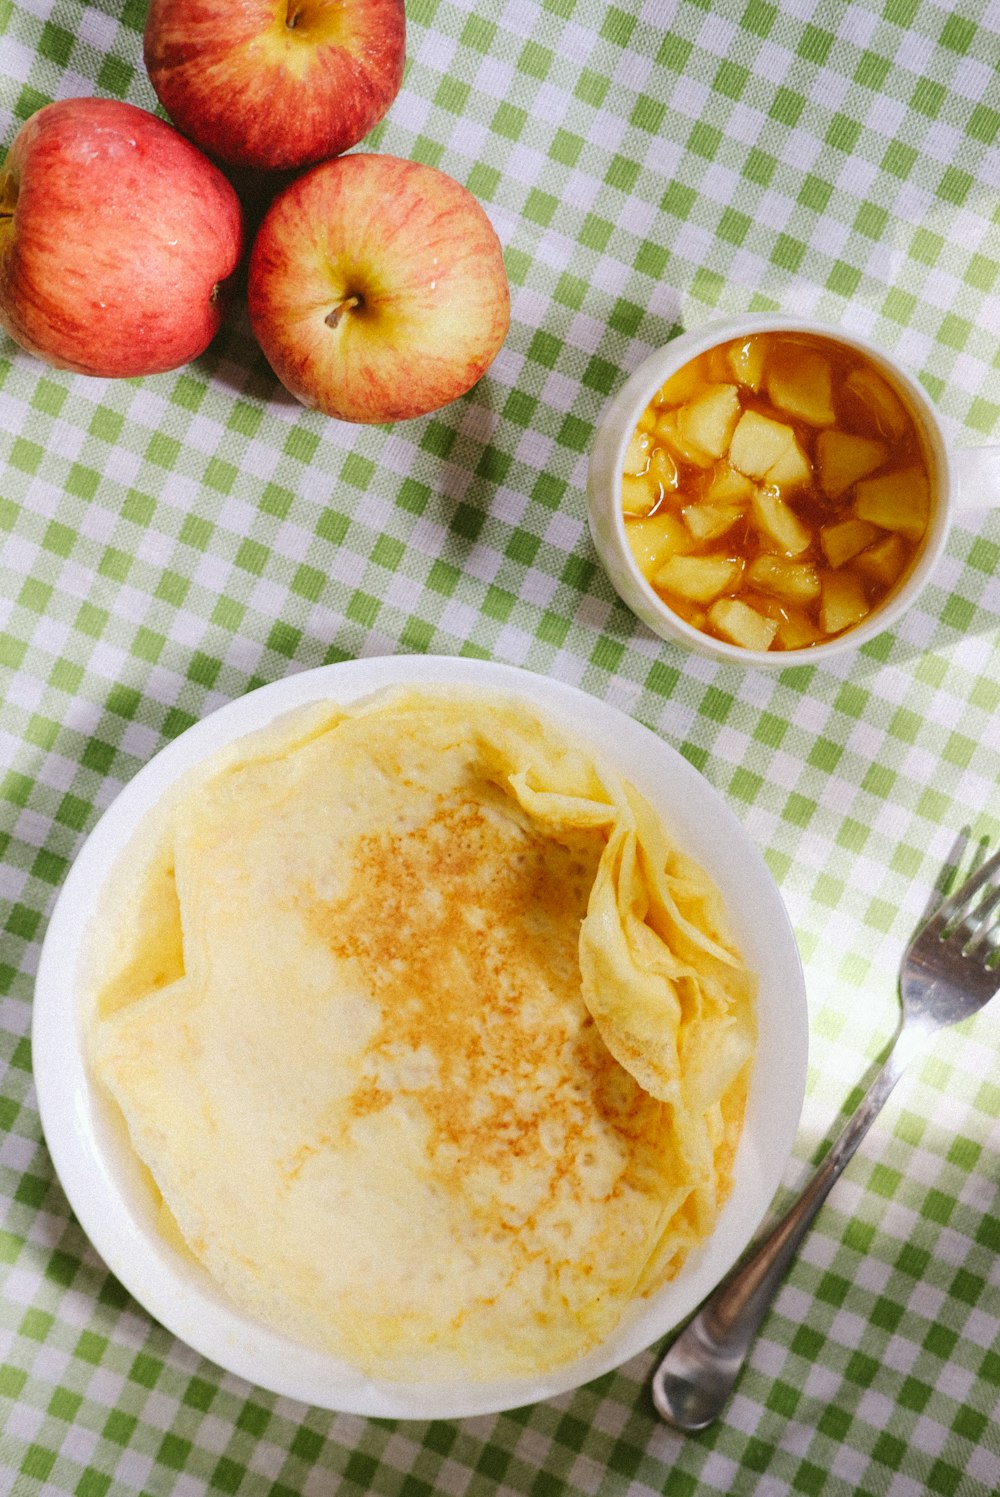 a plate of pancakes and apples on a table